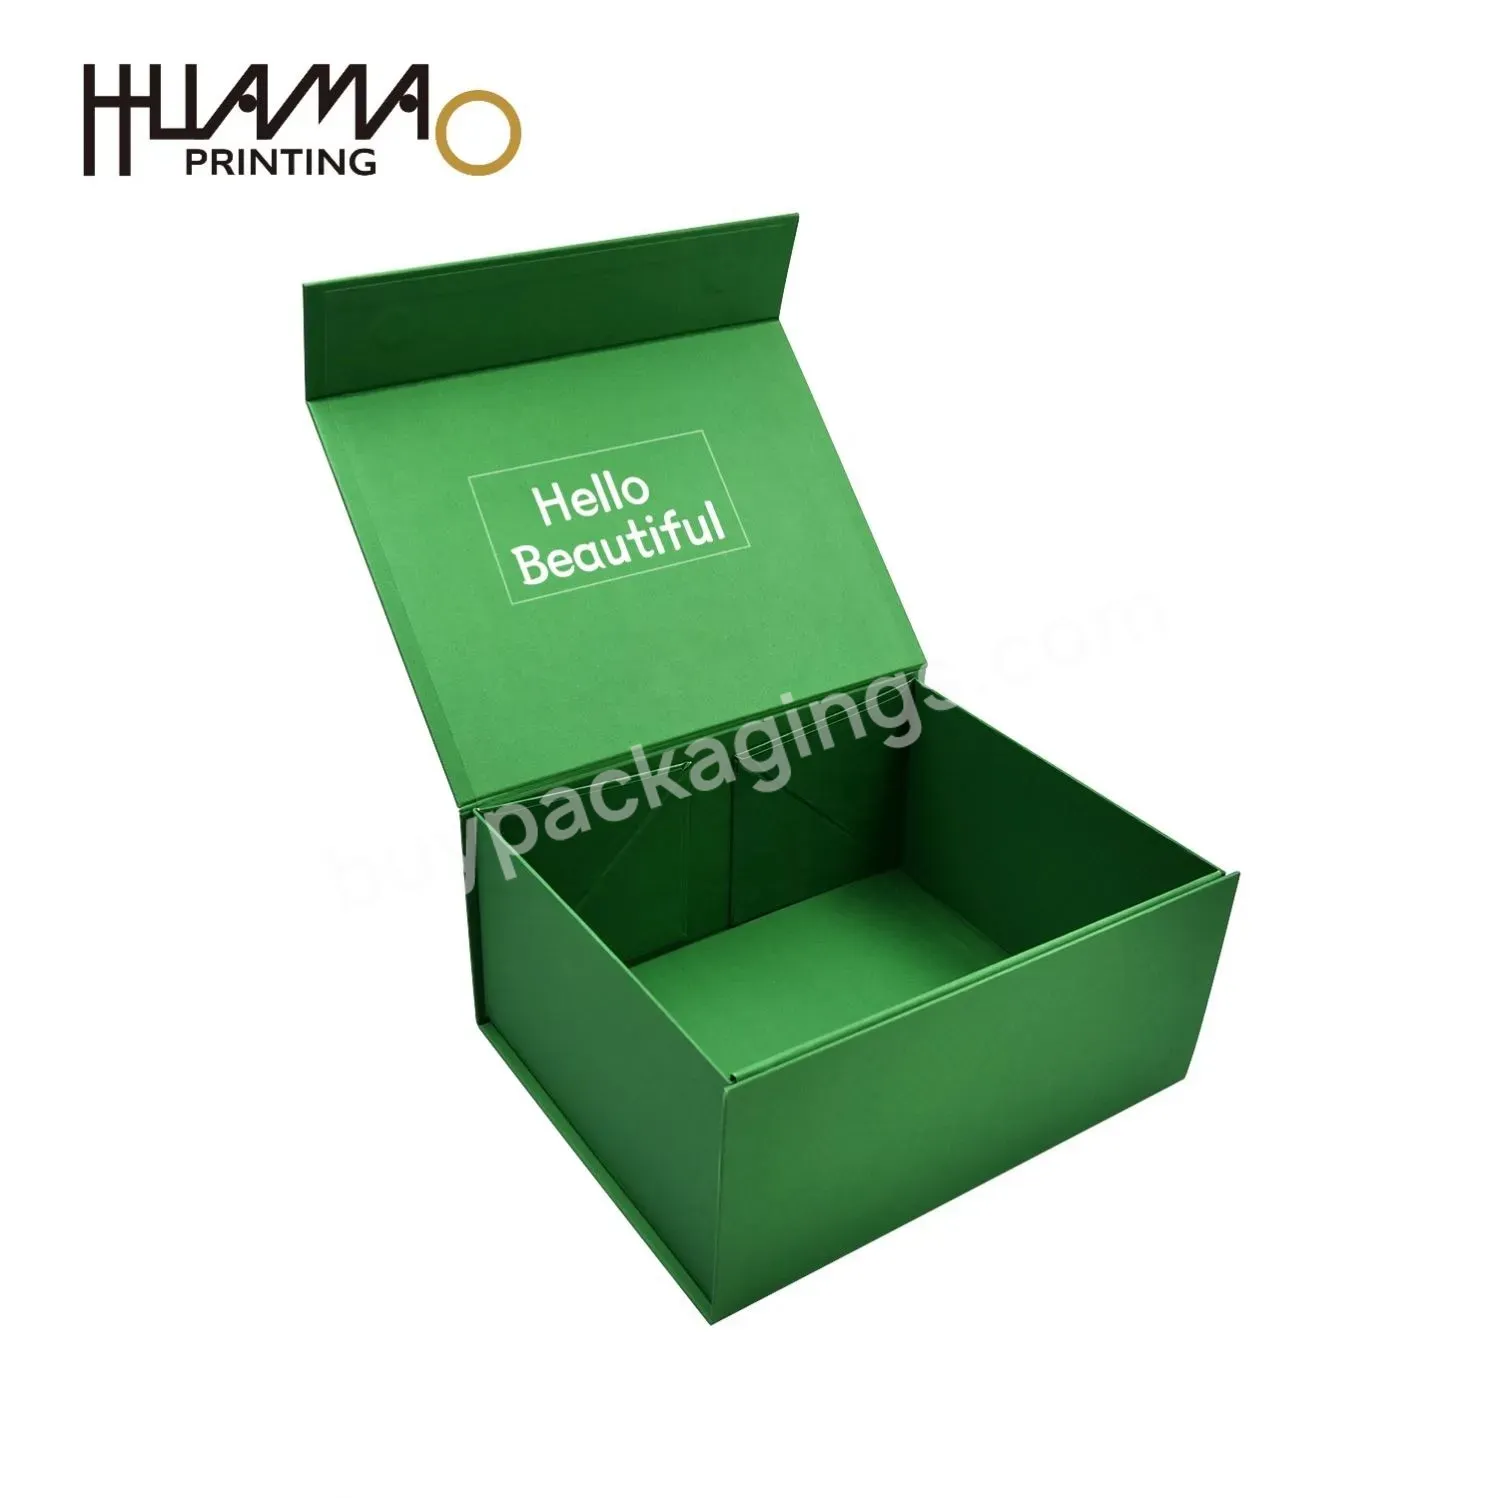 Reflective Sticker Chocolate Bar Packaging Paper Boxes Collapsible Paper Container Foldbable Box Packaging Caja De Regalo